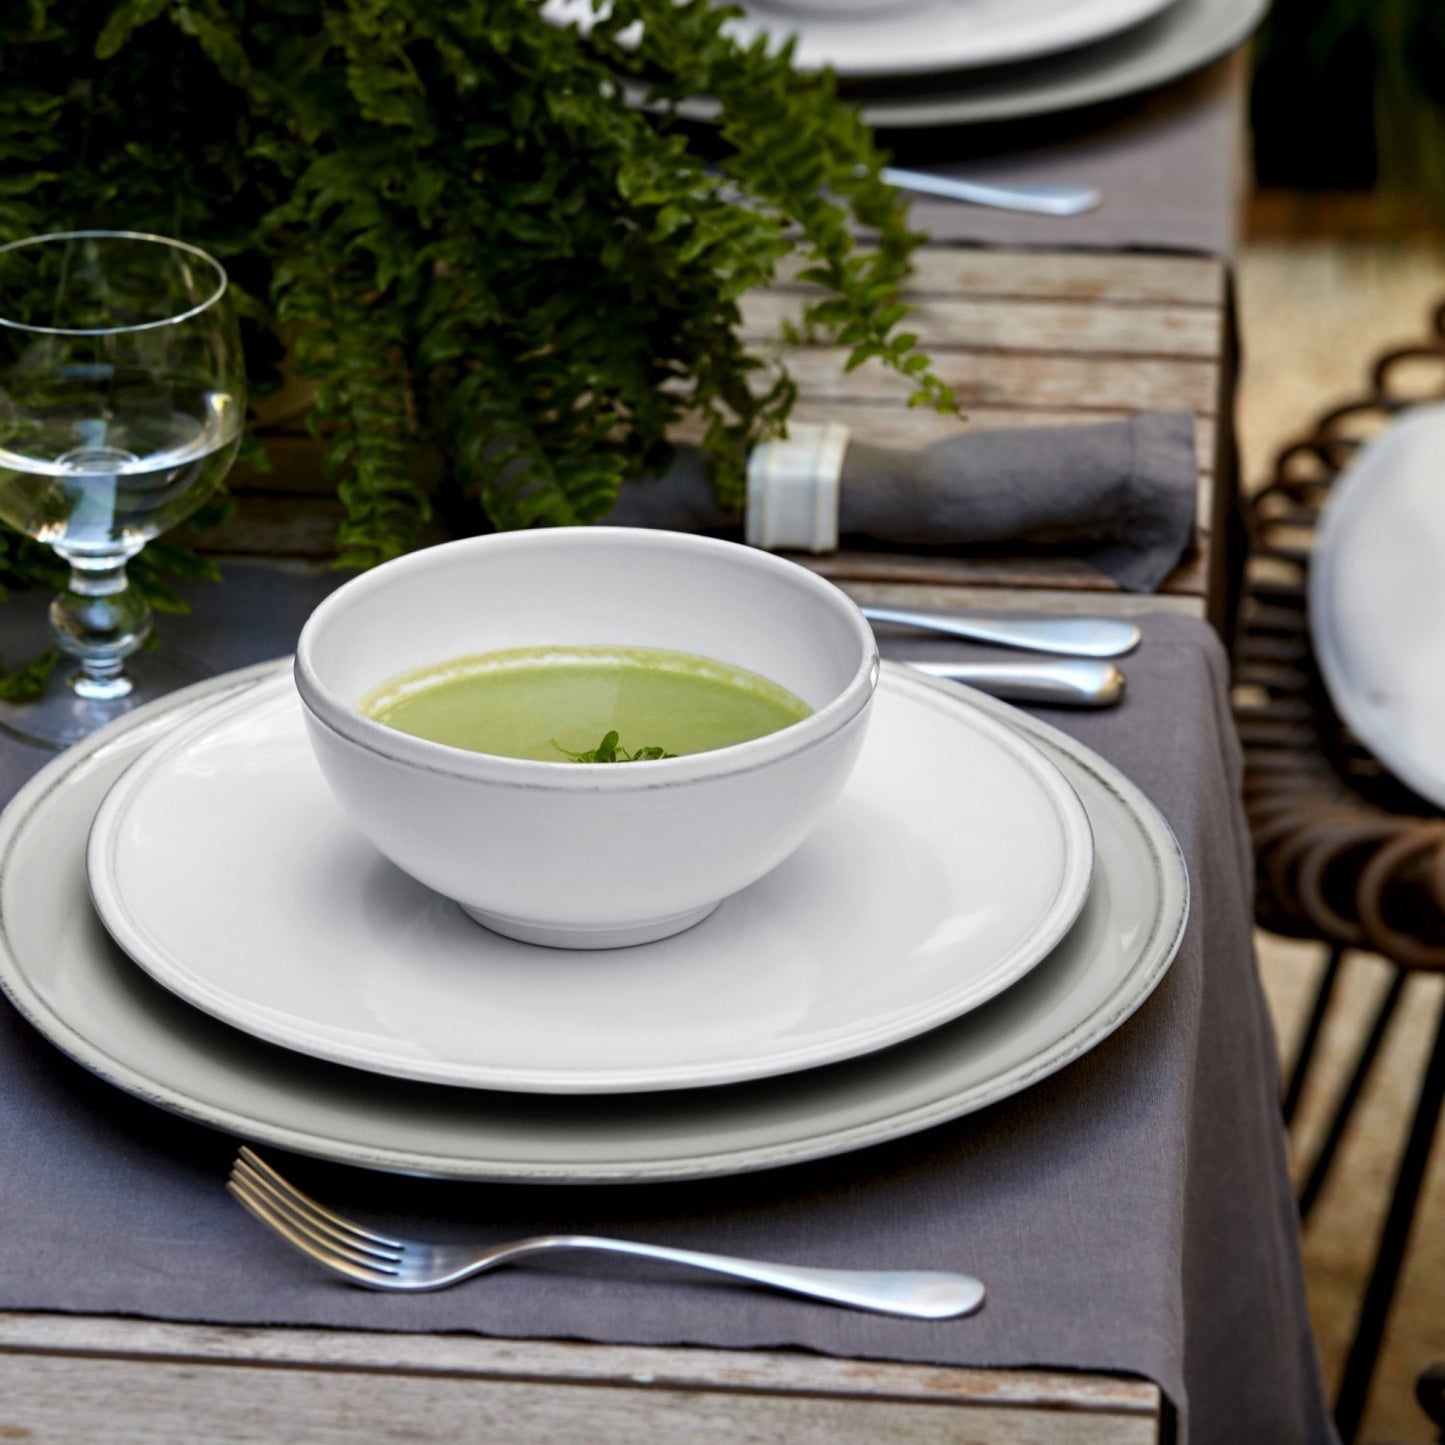 side view of table setting with white bowl on top filled with soup, silverware, glasses, and a fern.